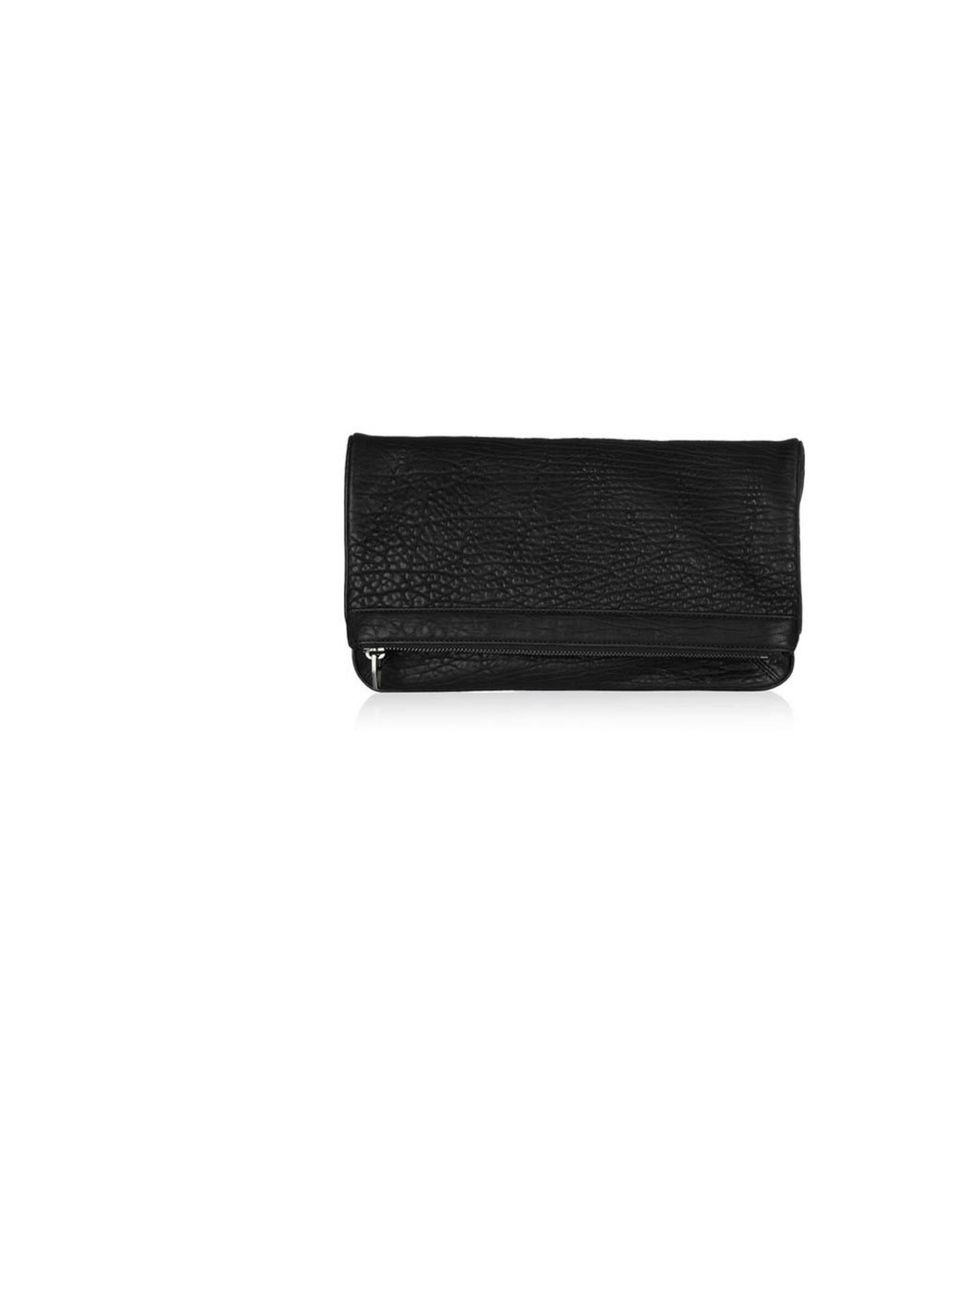 <p>Alexander Wang 'Dumbo' fold-over textured leather clutch, £460, at <a href="http://www.net-a-porter.com/product/189206">Net-a-Porter</a></p>